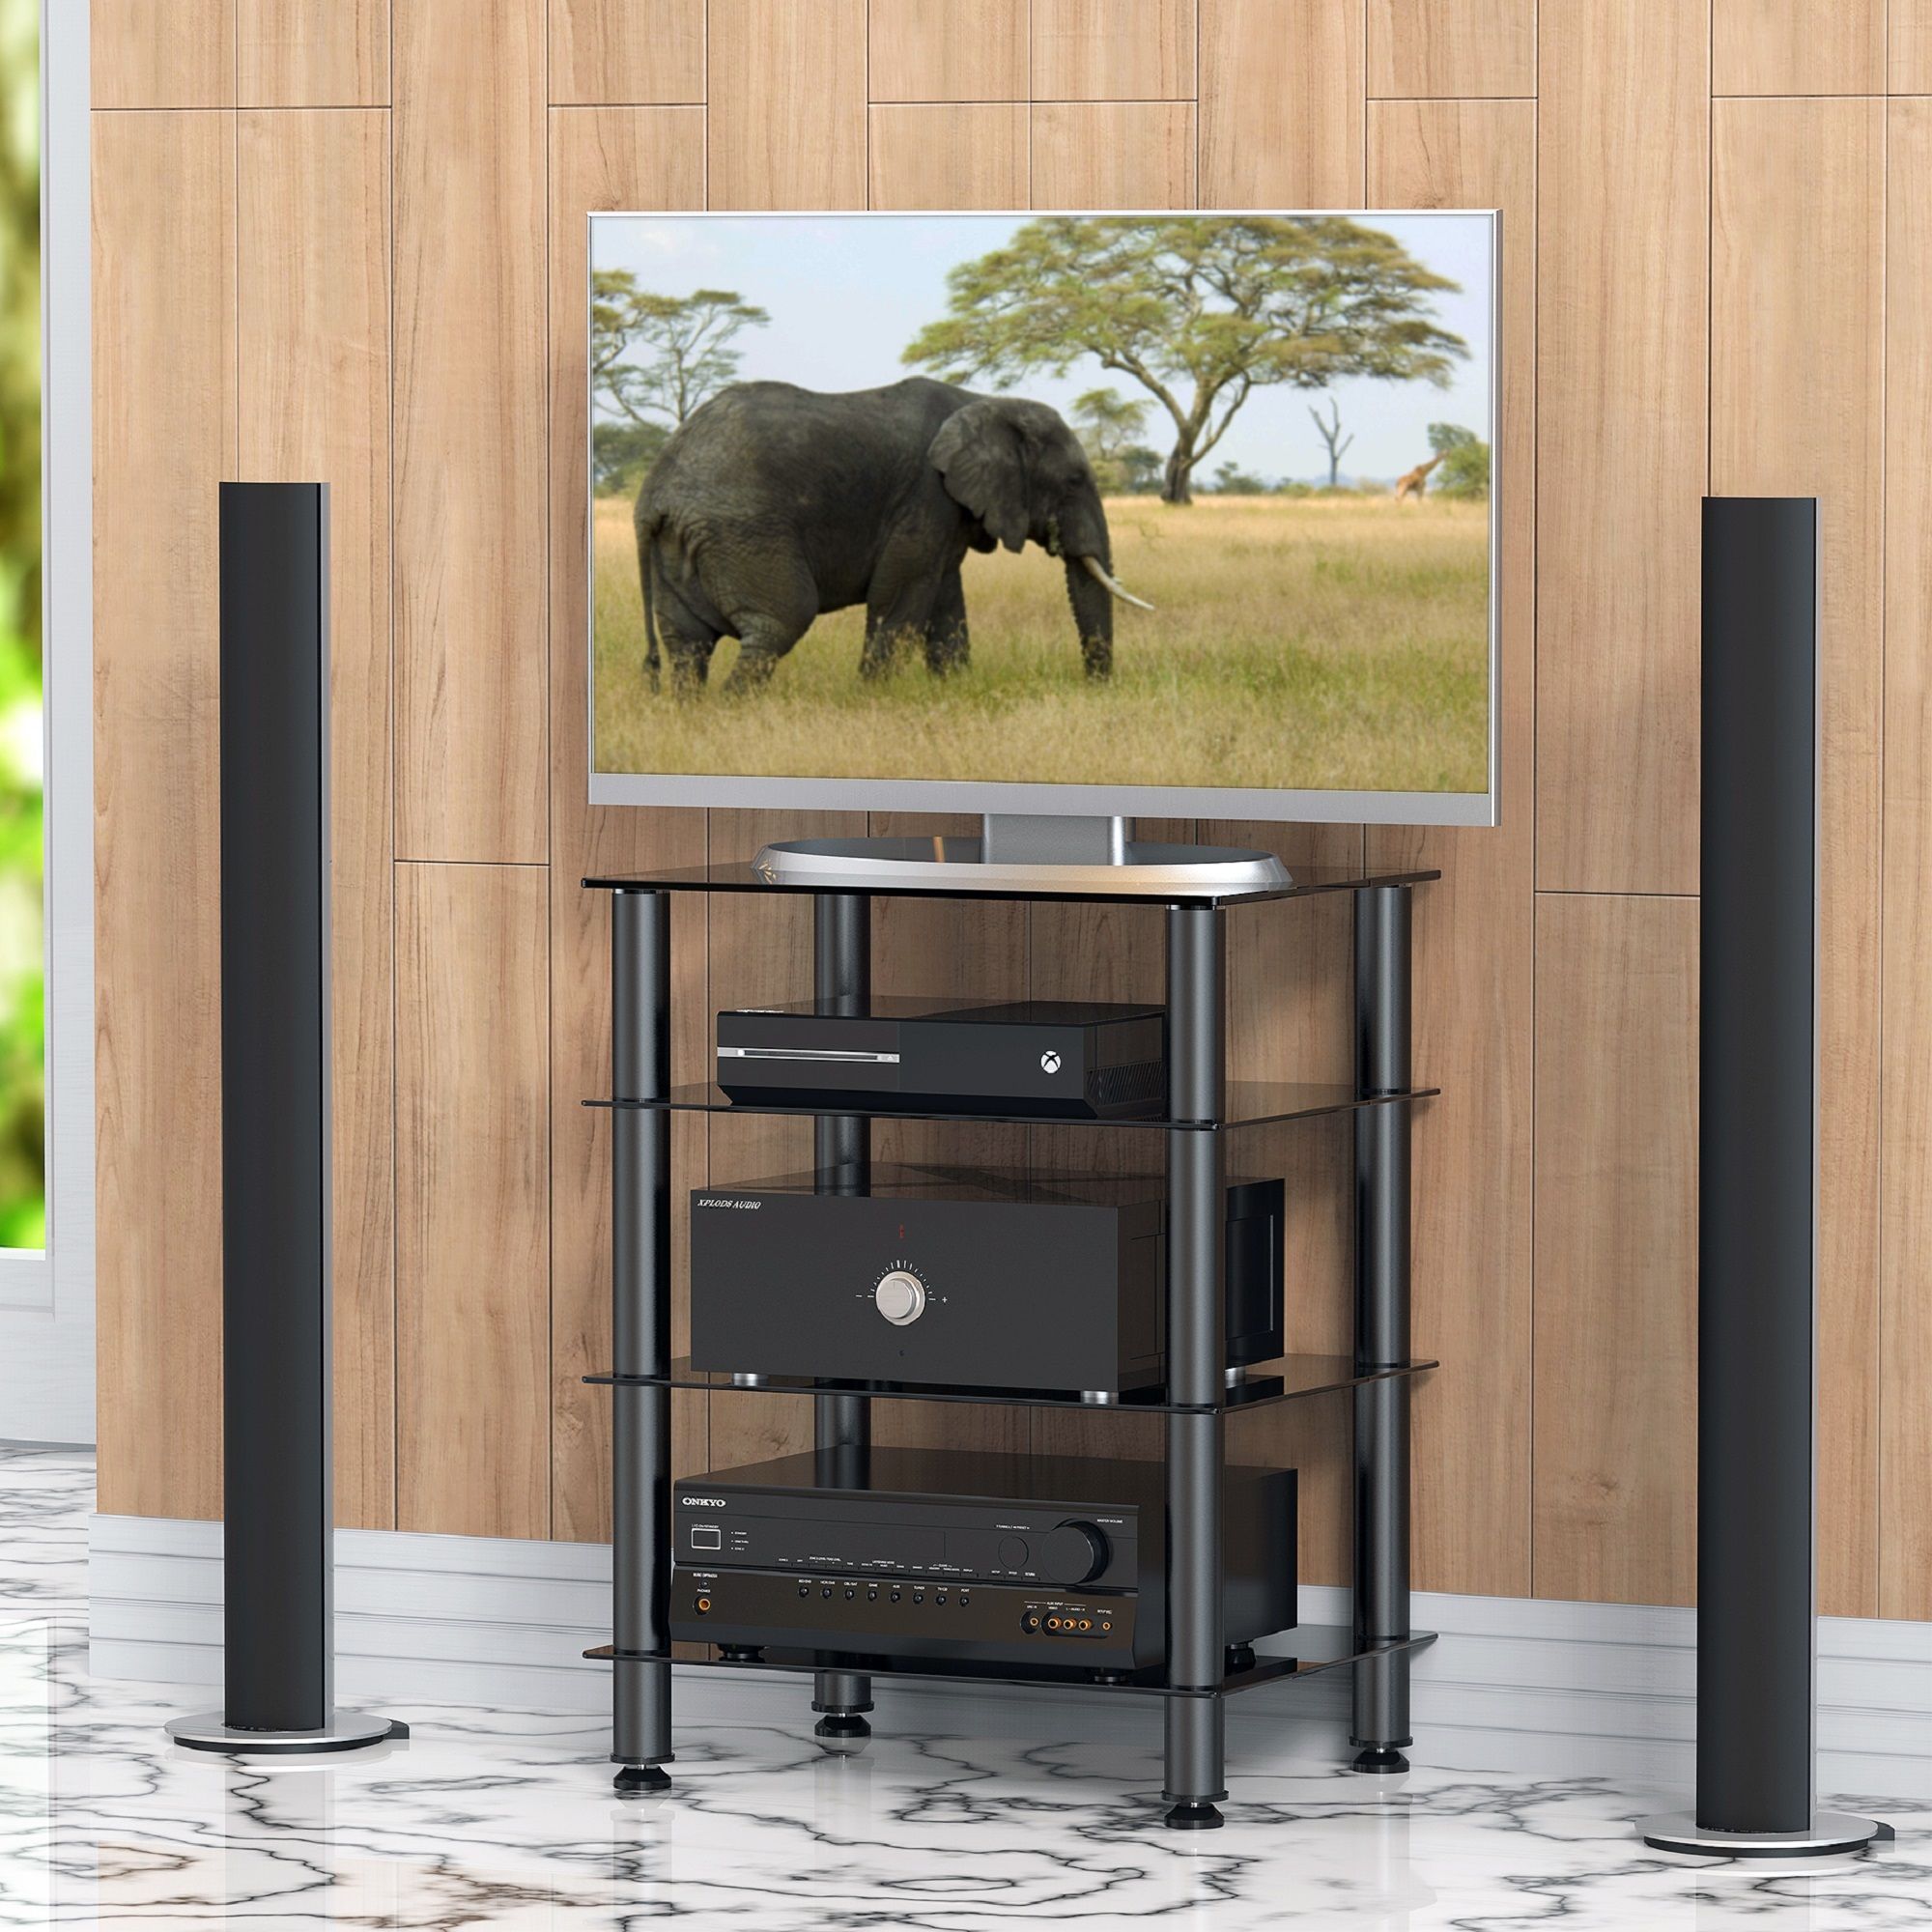 Fitueyes Media Stand Audio/video Component Cabinet With Intended For Turntable Tv Stands (View 12 of 15)